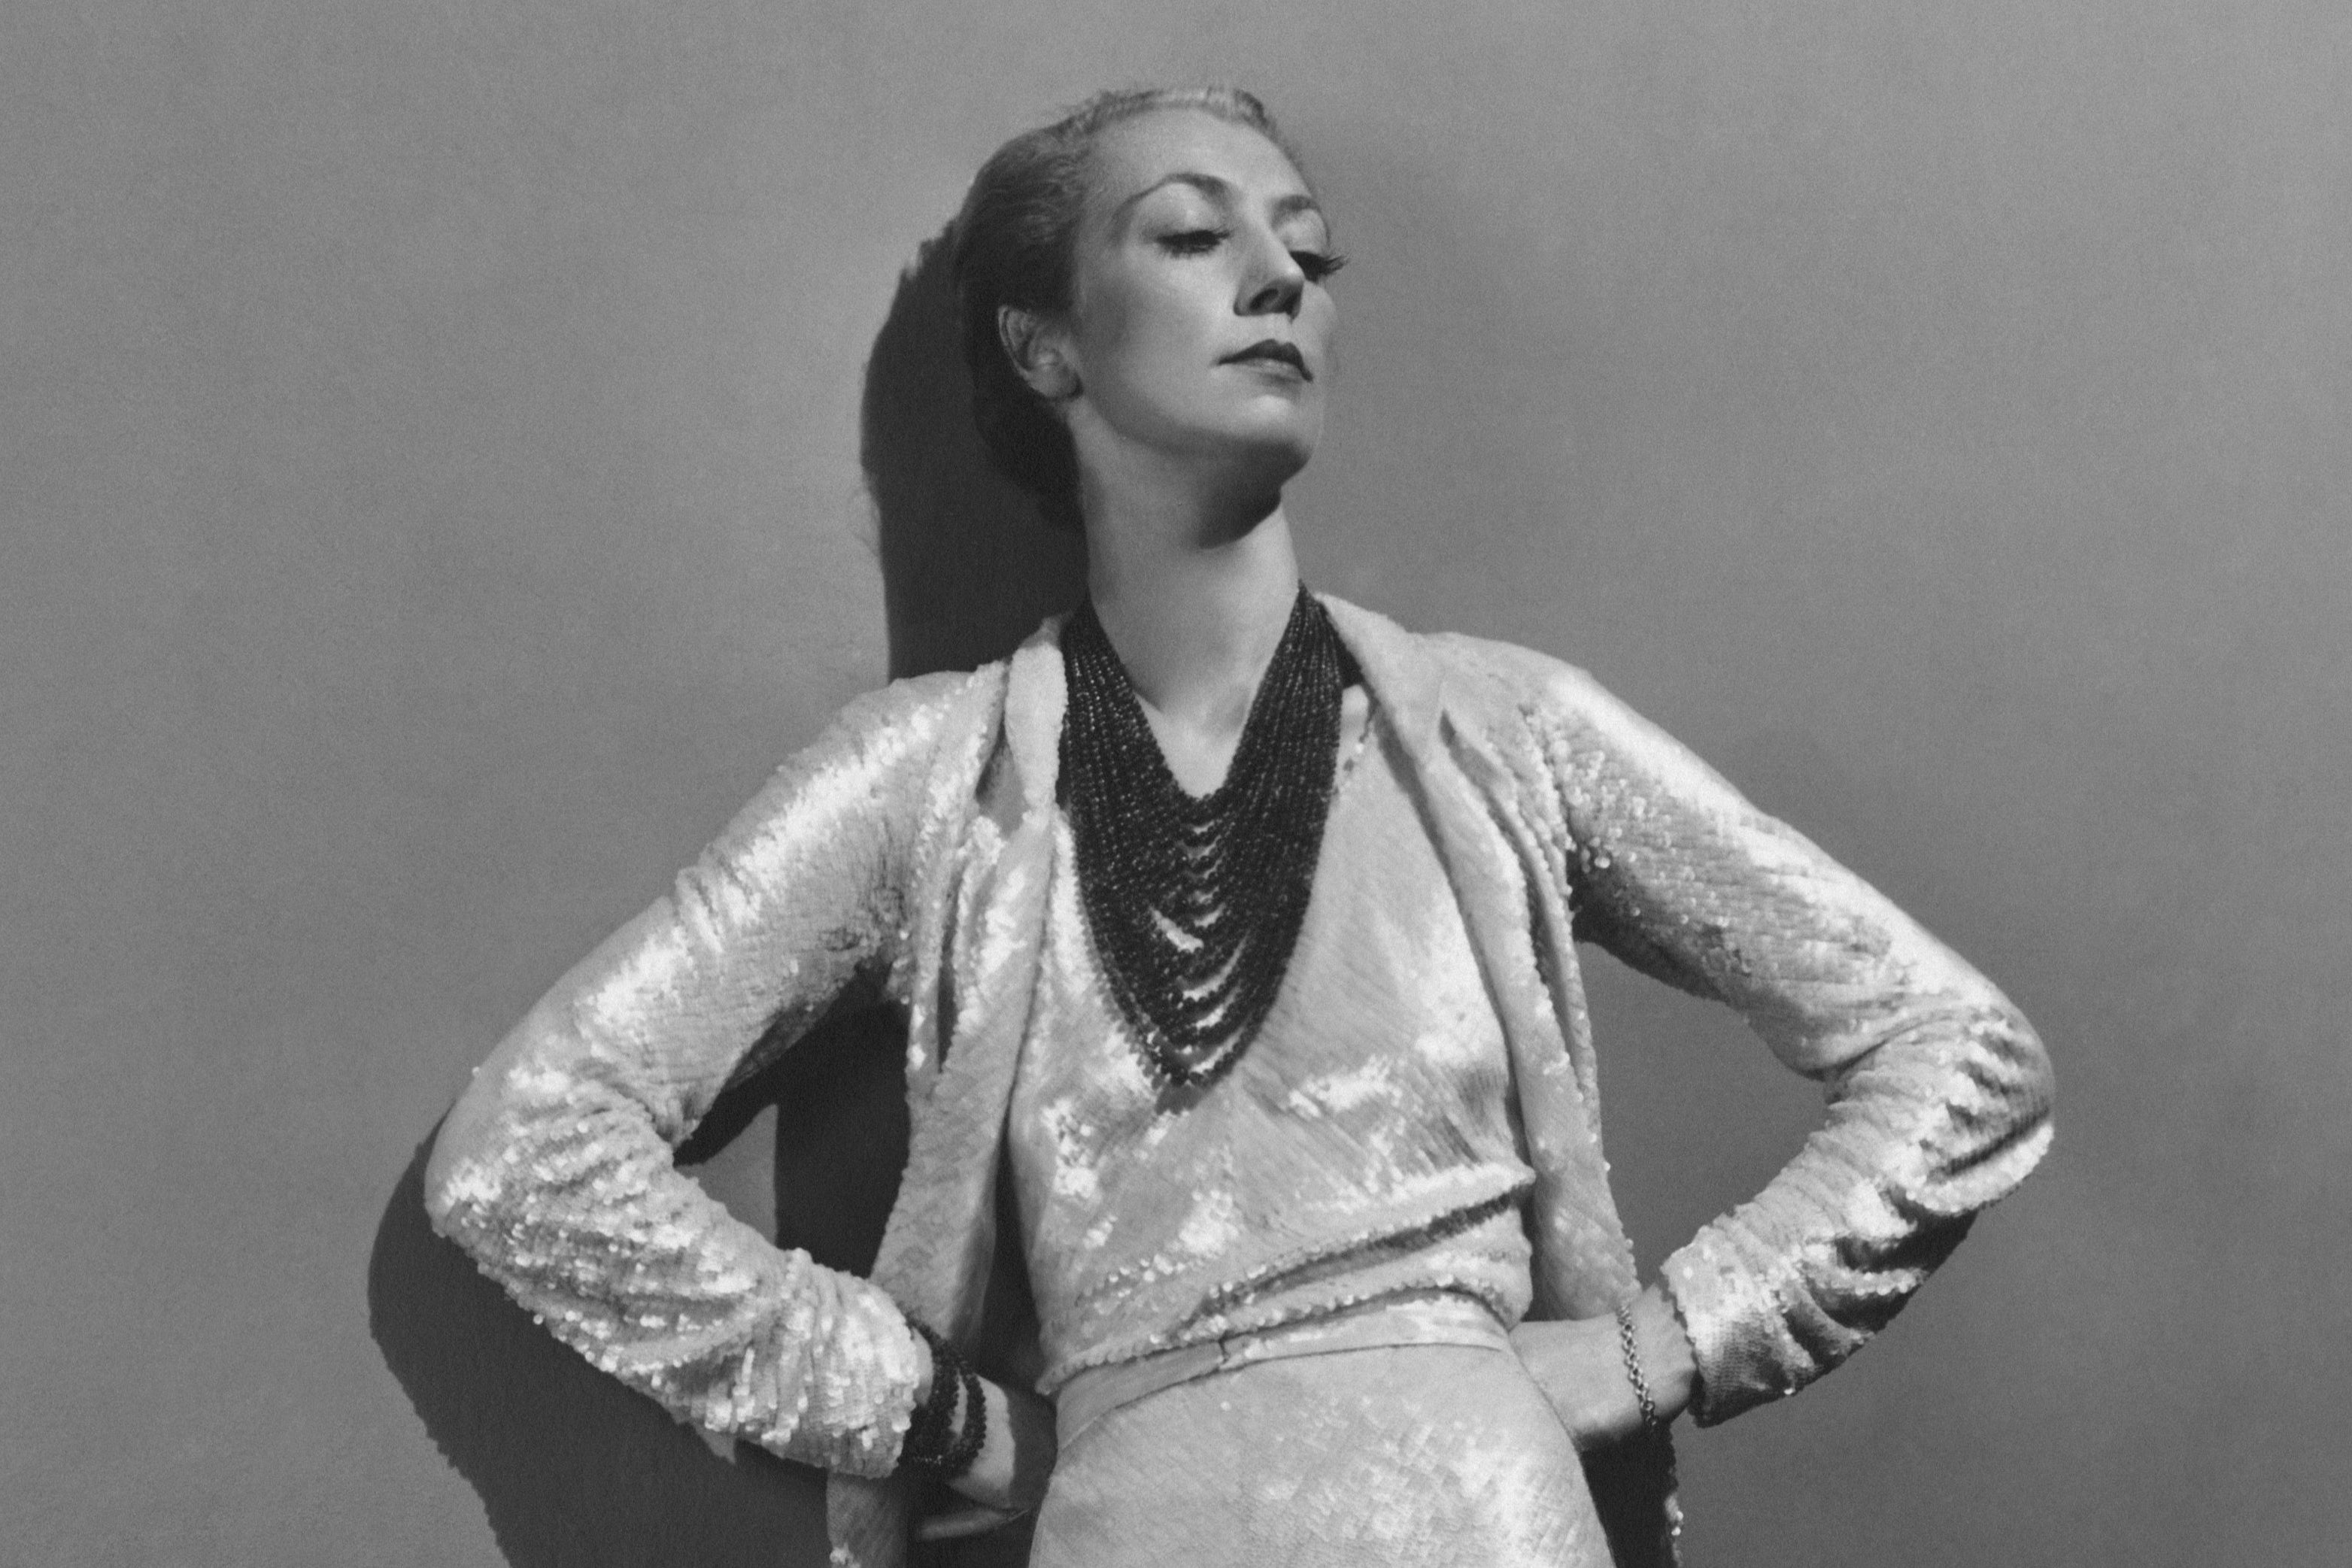 Jose-Maria Sert wearing a white sequin dress by Chanel, as photographed for ‘Vogue’ in 1936